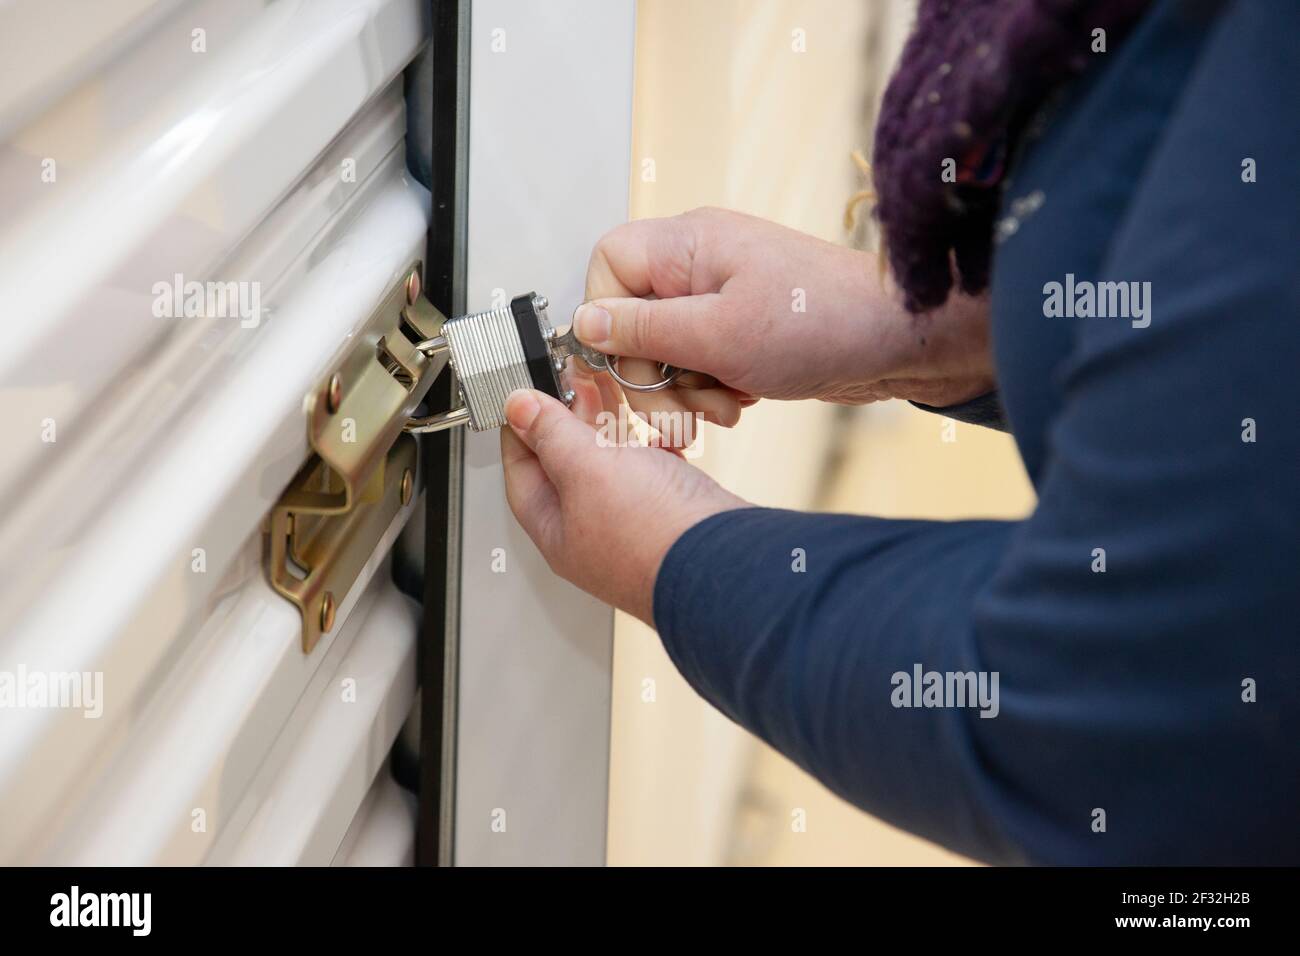 A person uses a key to gain access or unlock their padlocked secure unit Stock Photo